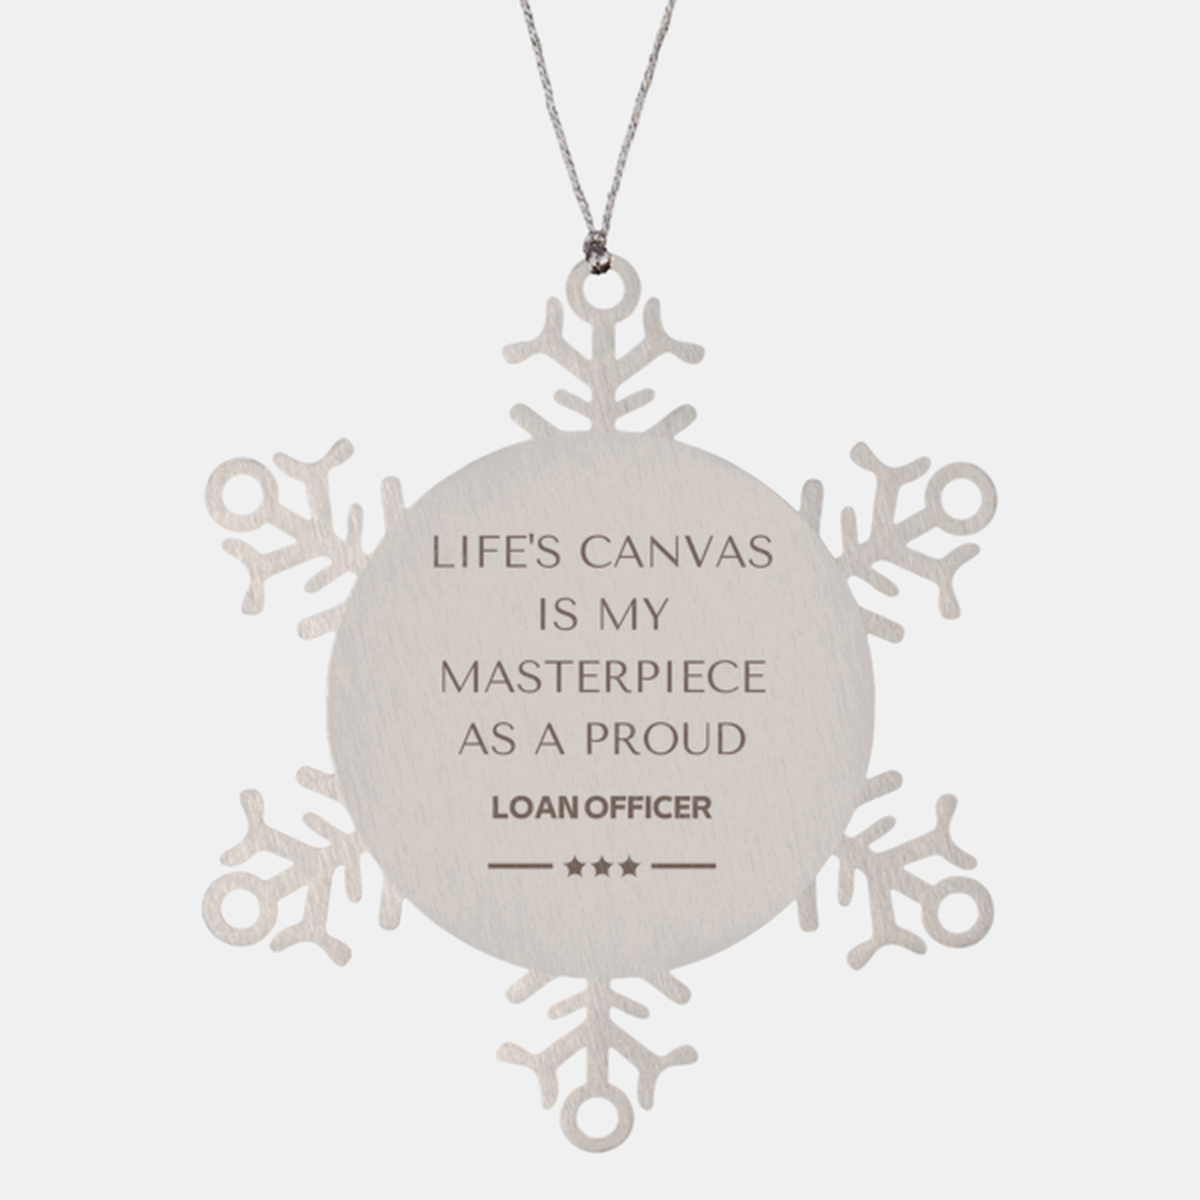 Proud Loan Officer Gifts, Life's canvas is my masterpiece, Epic Birthday Christmas Unique Snowflake Ornament For Loan Officer, Coworkers, Men, Women, Friends